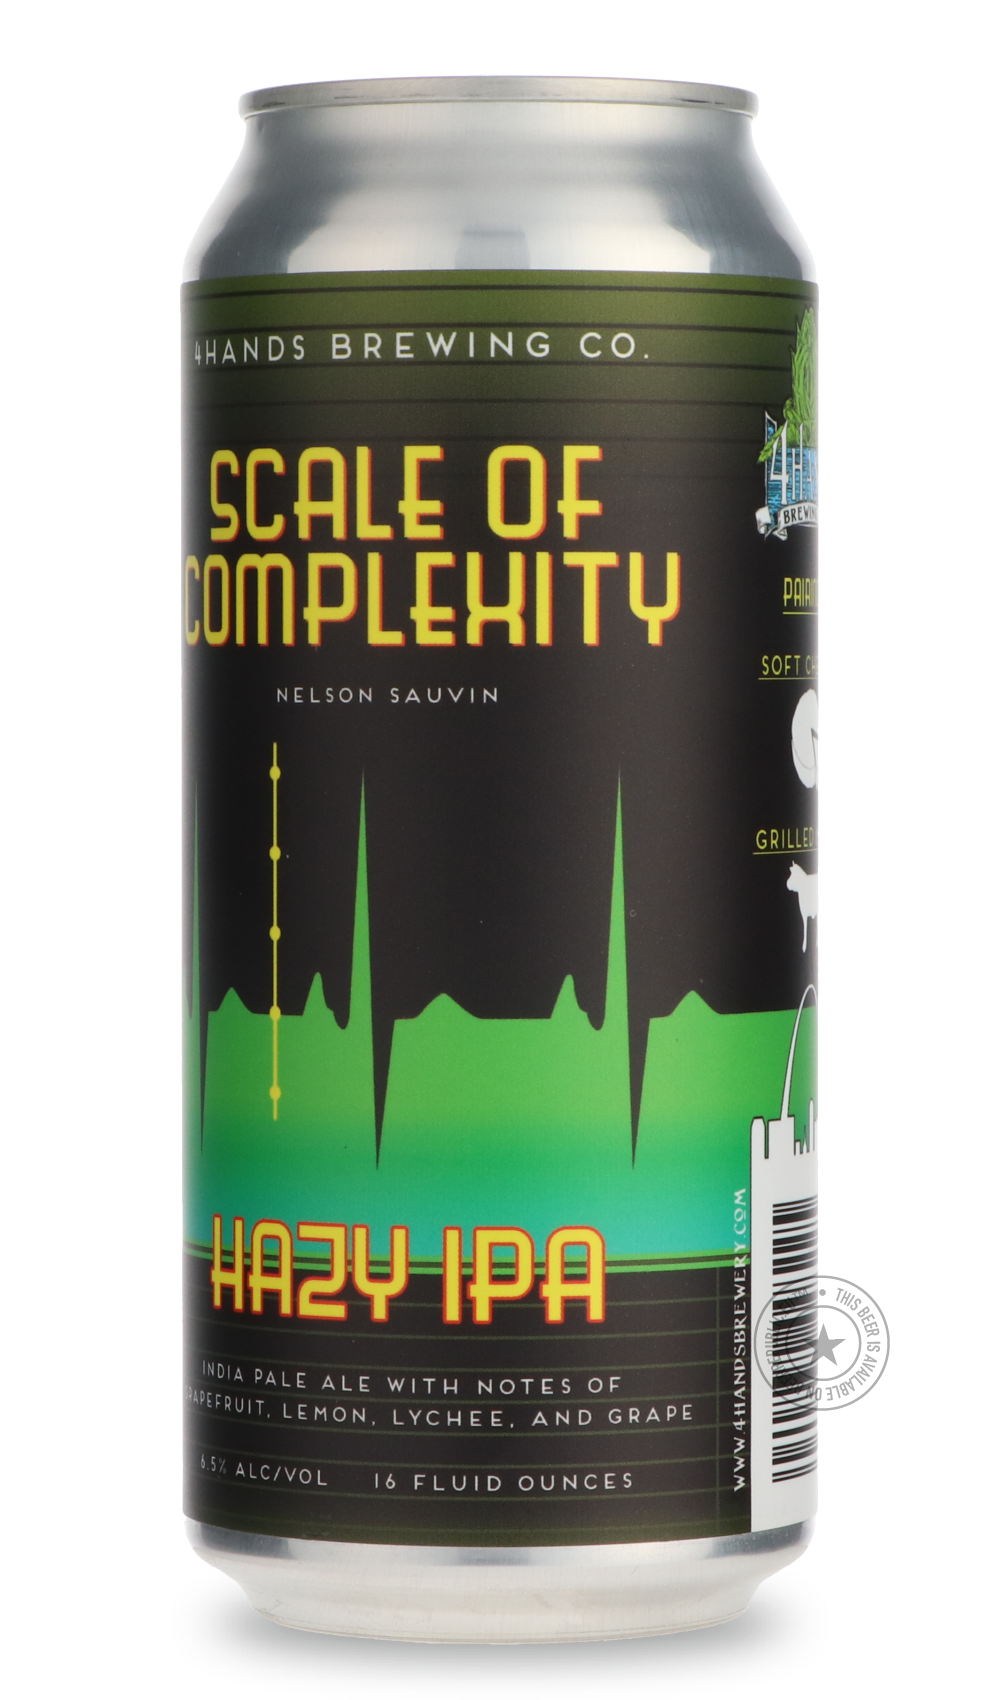 -4 Hands- Scale of Complexity - Nelson Sauvin-IPA- Only @ Beer Republic - The best online beer store for American & Canadian craft beer - Buy beer online from the USA and Canada - Bier online kopen - Amerikaans bier kopen - Craft beer store - Craft beer kopen - Amerikanisch bier kaufen - Bier online kaufen - Acheter biere online - IPA - Stout - Porter - New England IPA - Hazy IPA - Imperial Stout - Barrel Aged - Barrel Aged Imperial Stout - Brown - Dark beer - Blond - Blonde - Pilsner - Lager - Wheat - Weiz